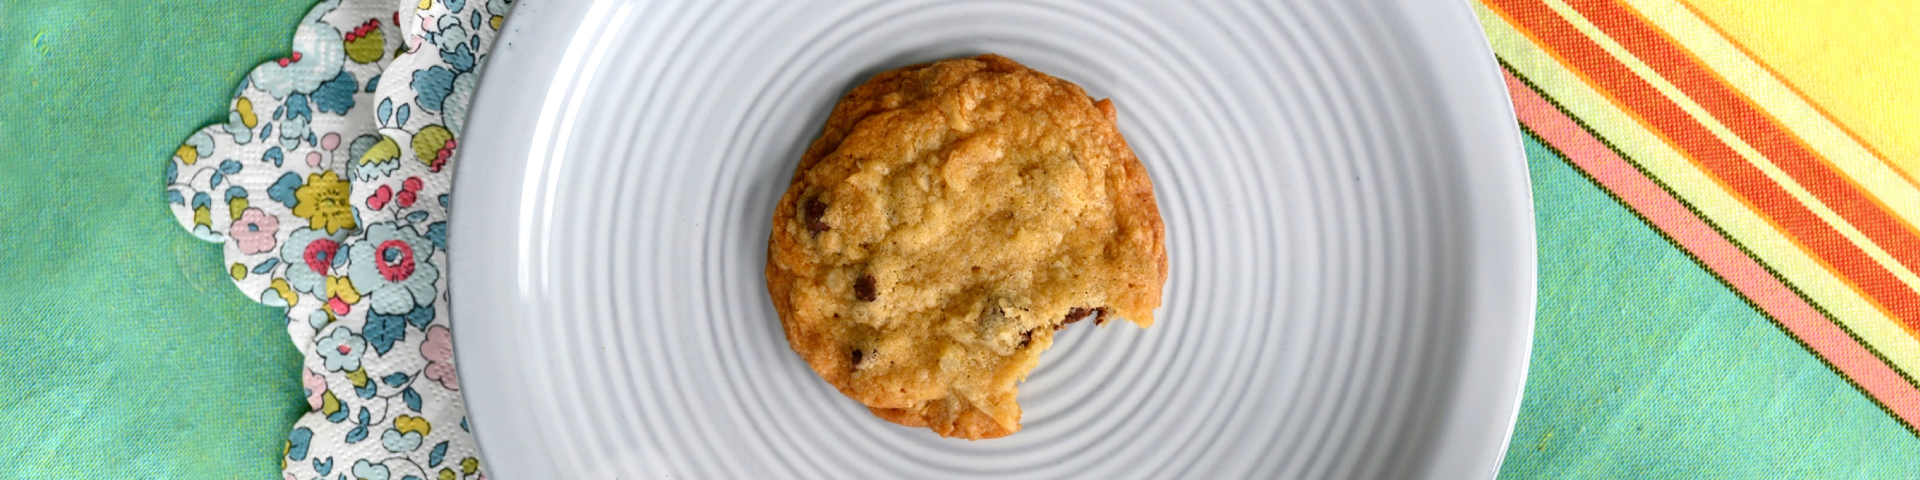 Through personalisation into the Cookieless World